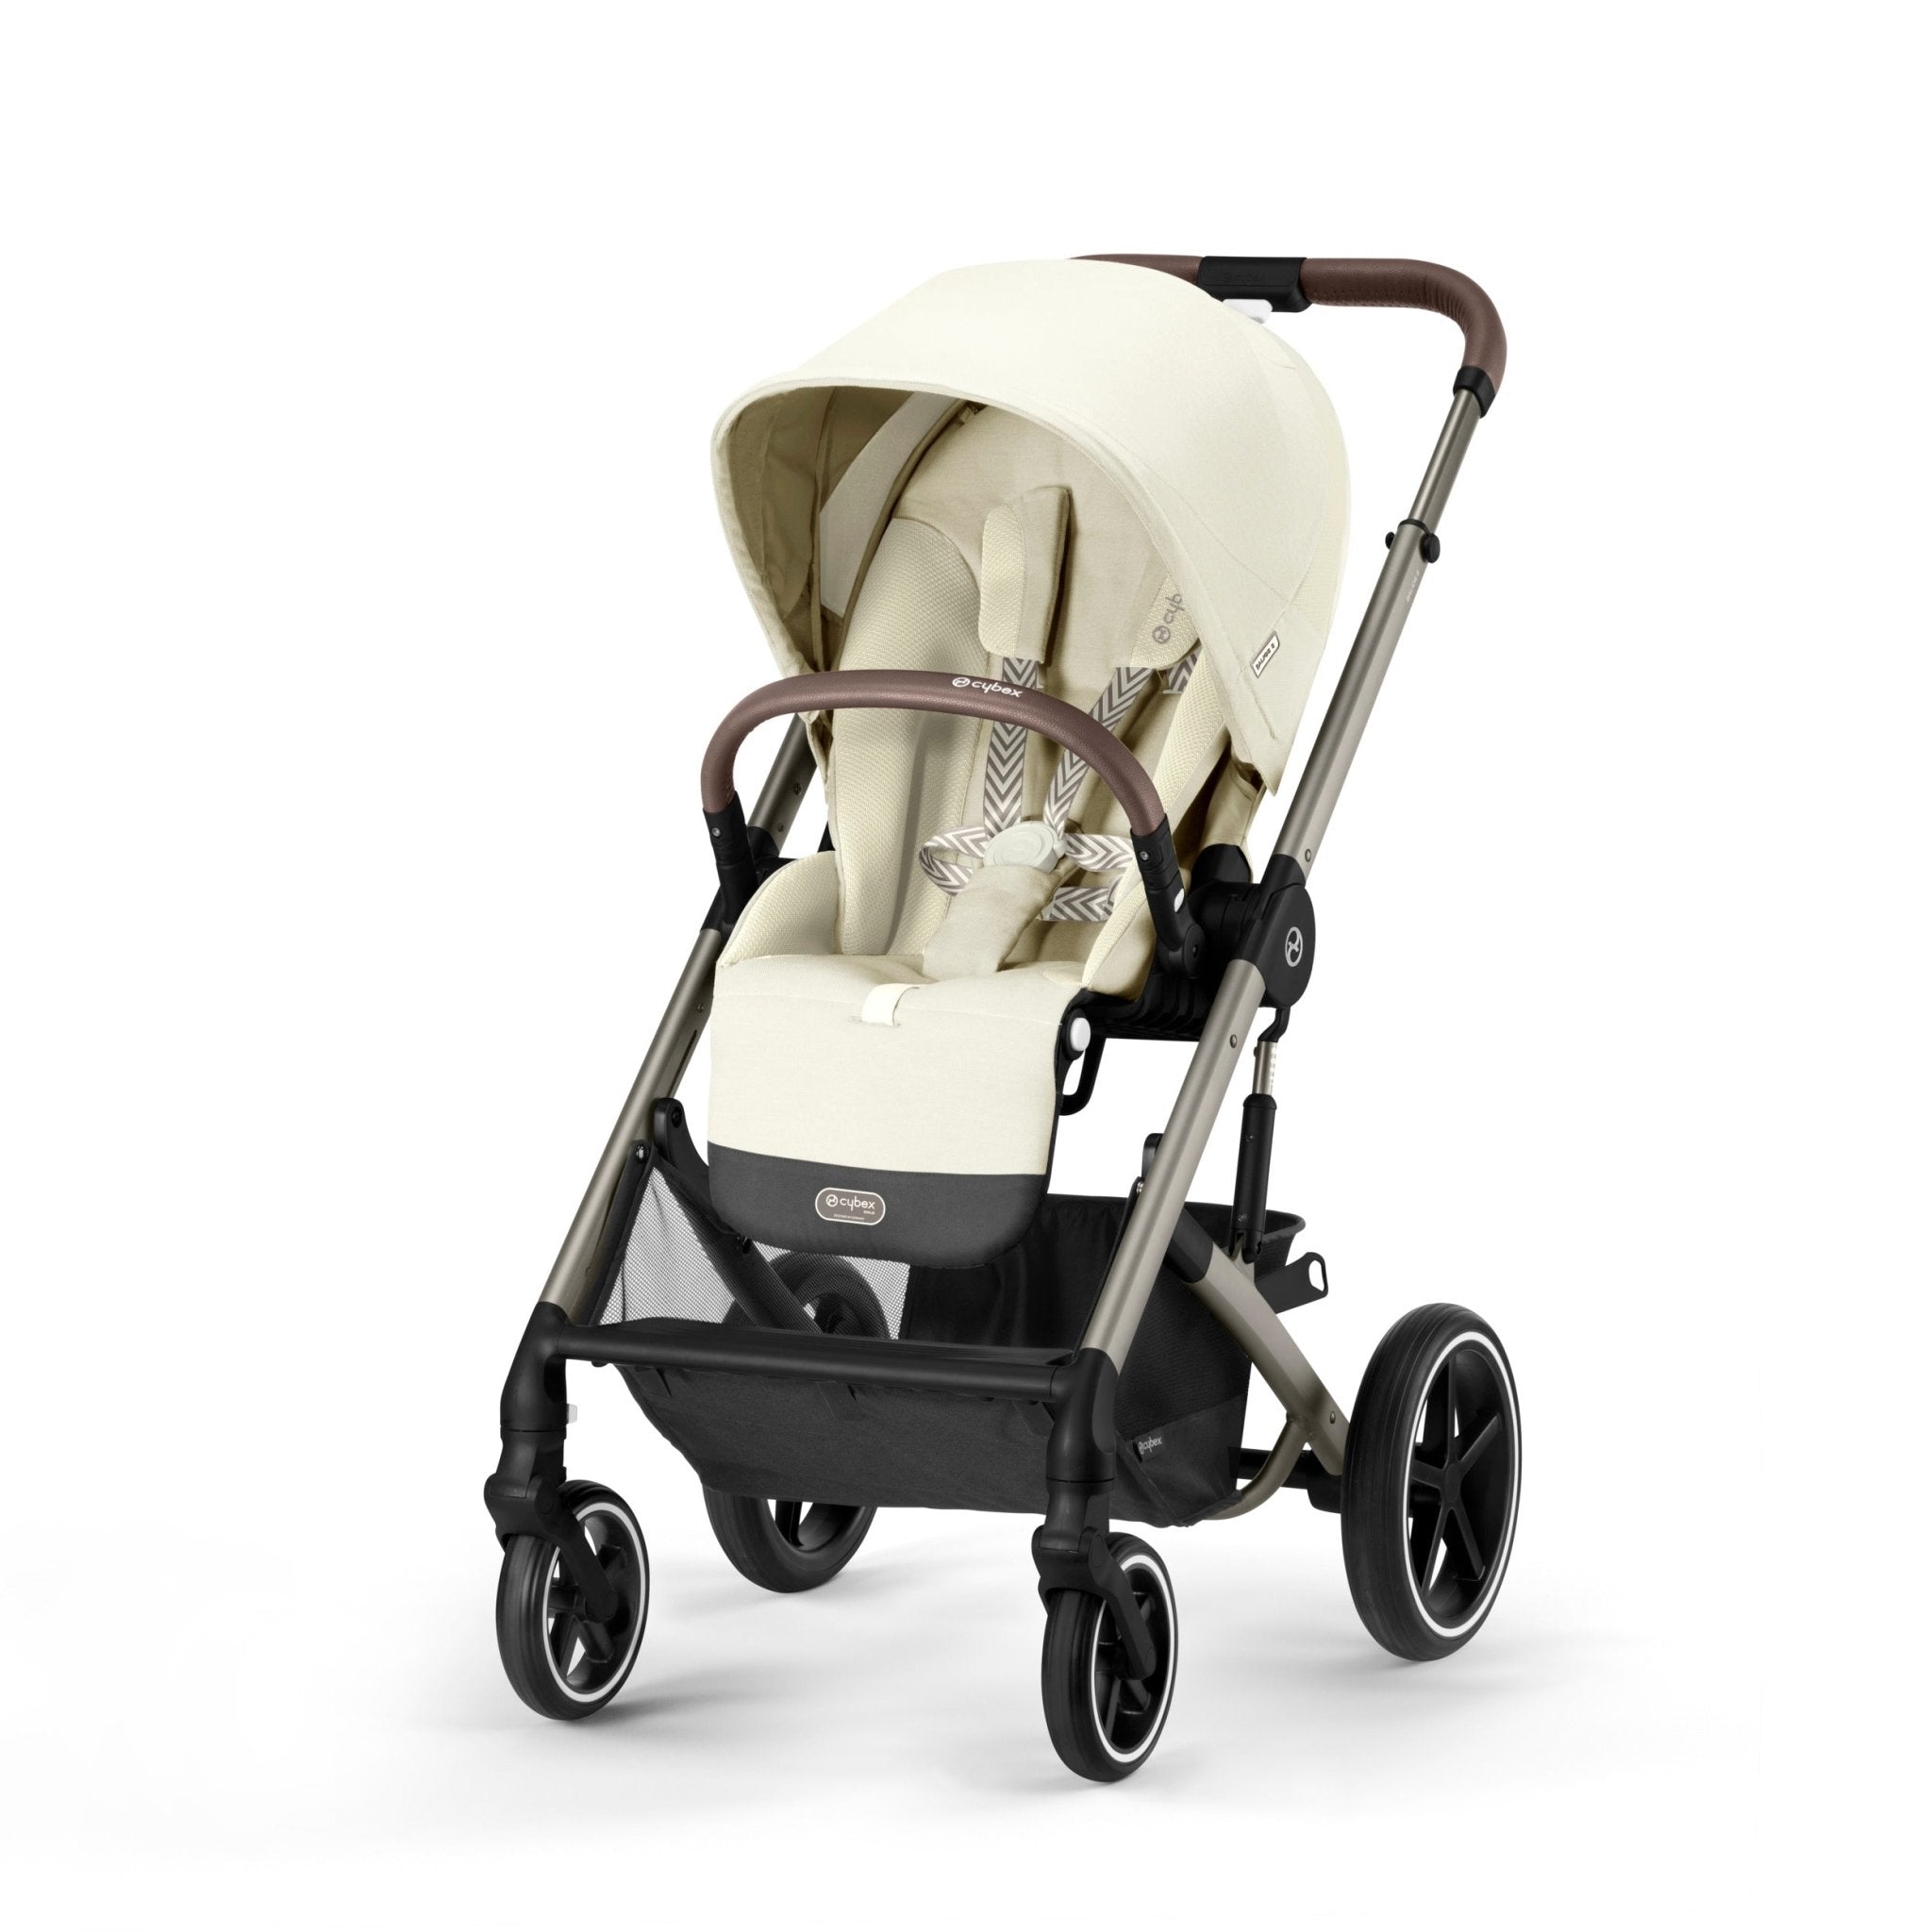 Cybex Balios S Lux 2 Stroller - ANB Baby -4063846398263$500 -$1000